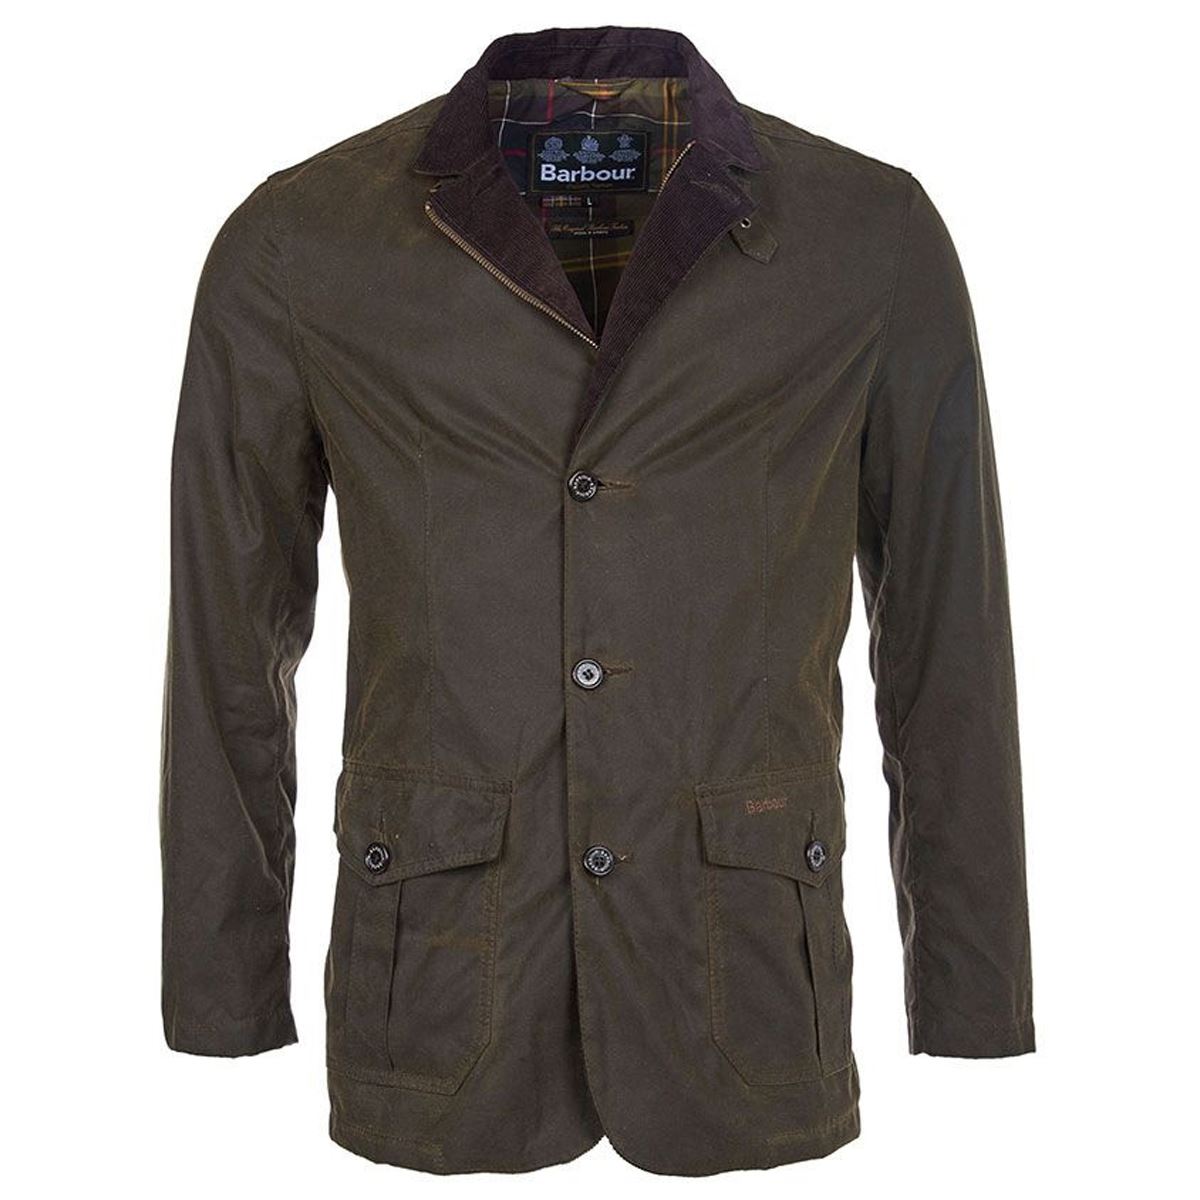 What are the specs of the Barbour Lutz Jacket?